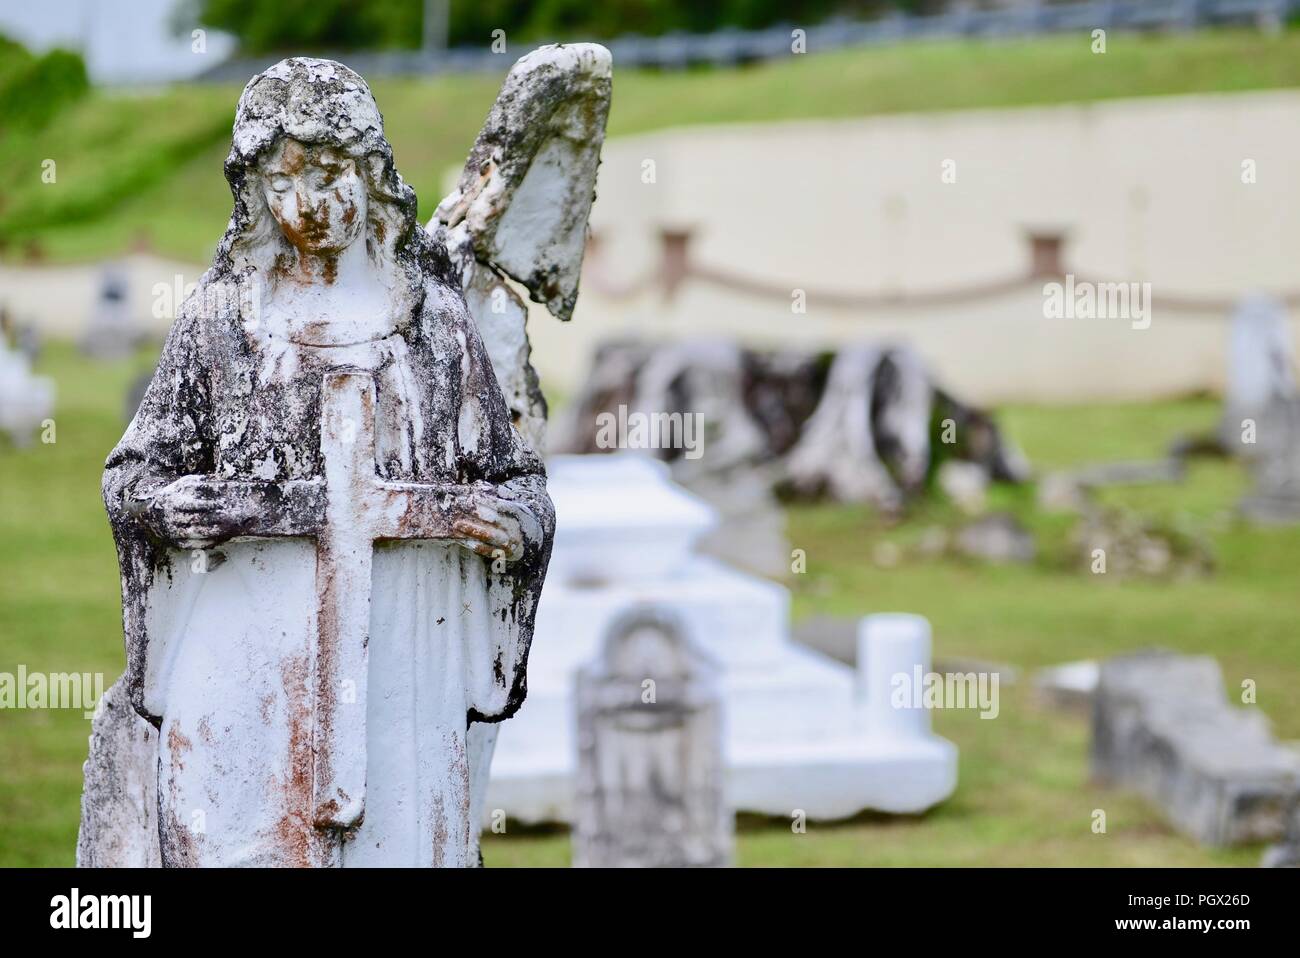 Angel statue in Sumay Cemetery, Guam, July 19, 2018. Image courtesy Petty Officer 3rd Class Amanda Levasseur / U.S. Coast Guard District 14 Hawaii Pacific. () Stock Photo